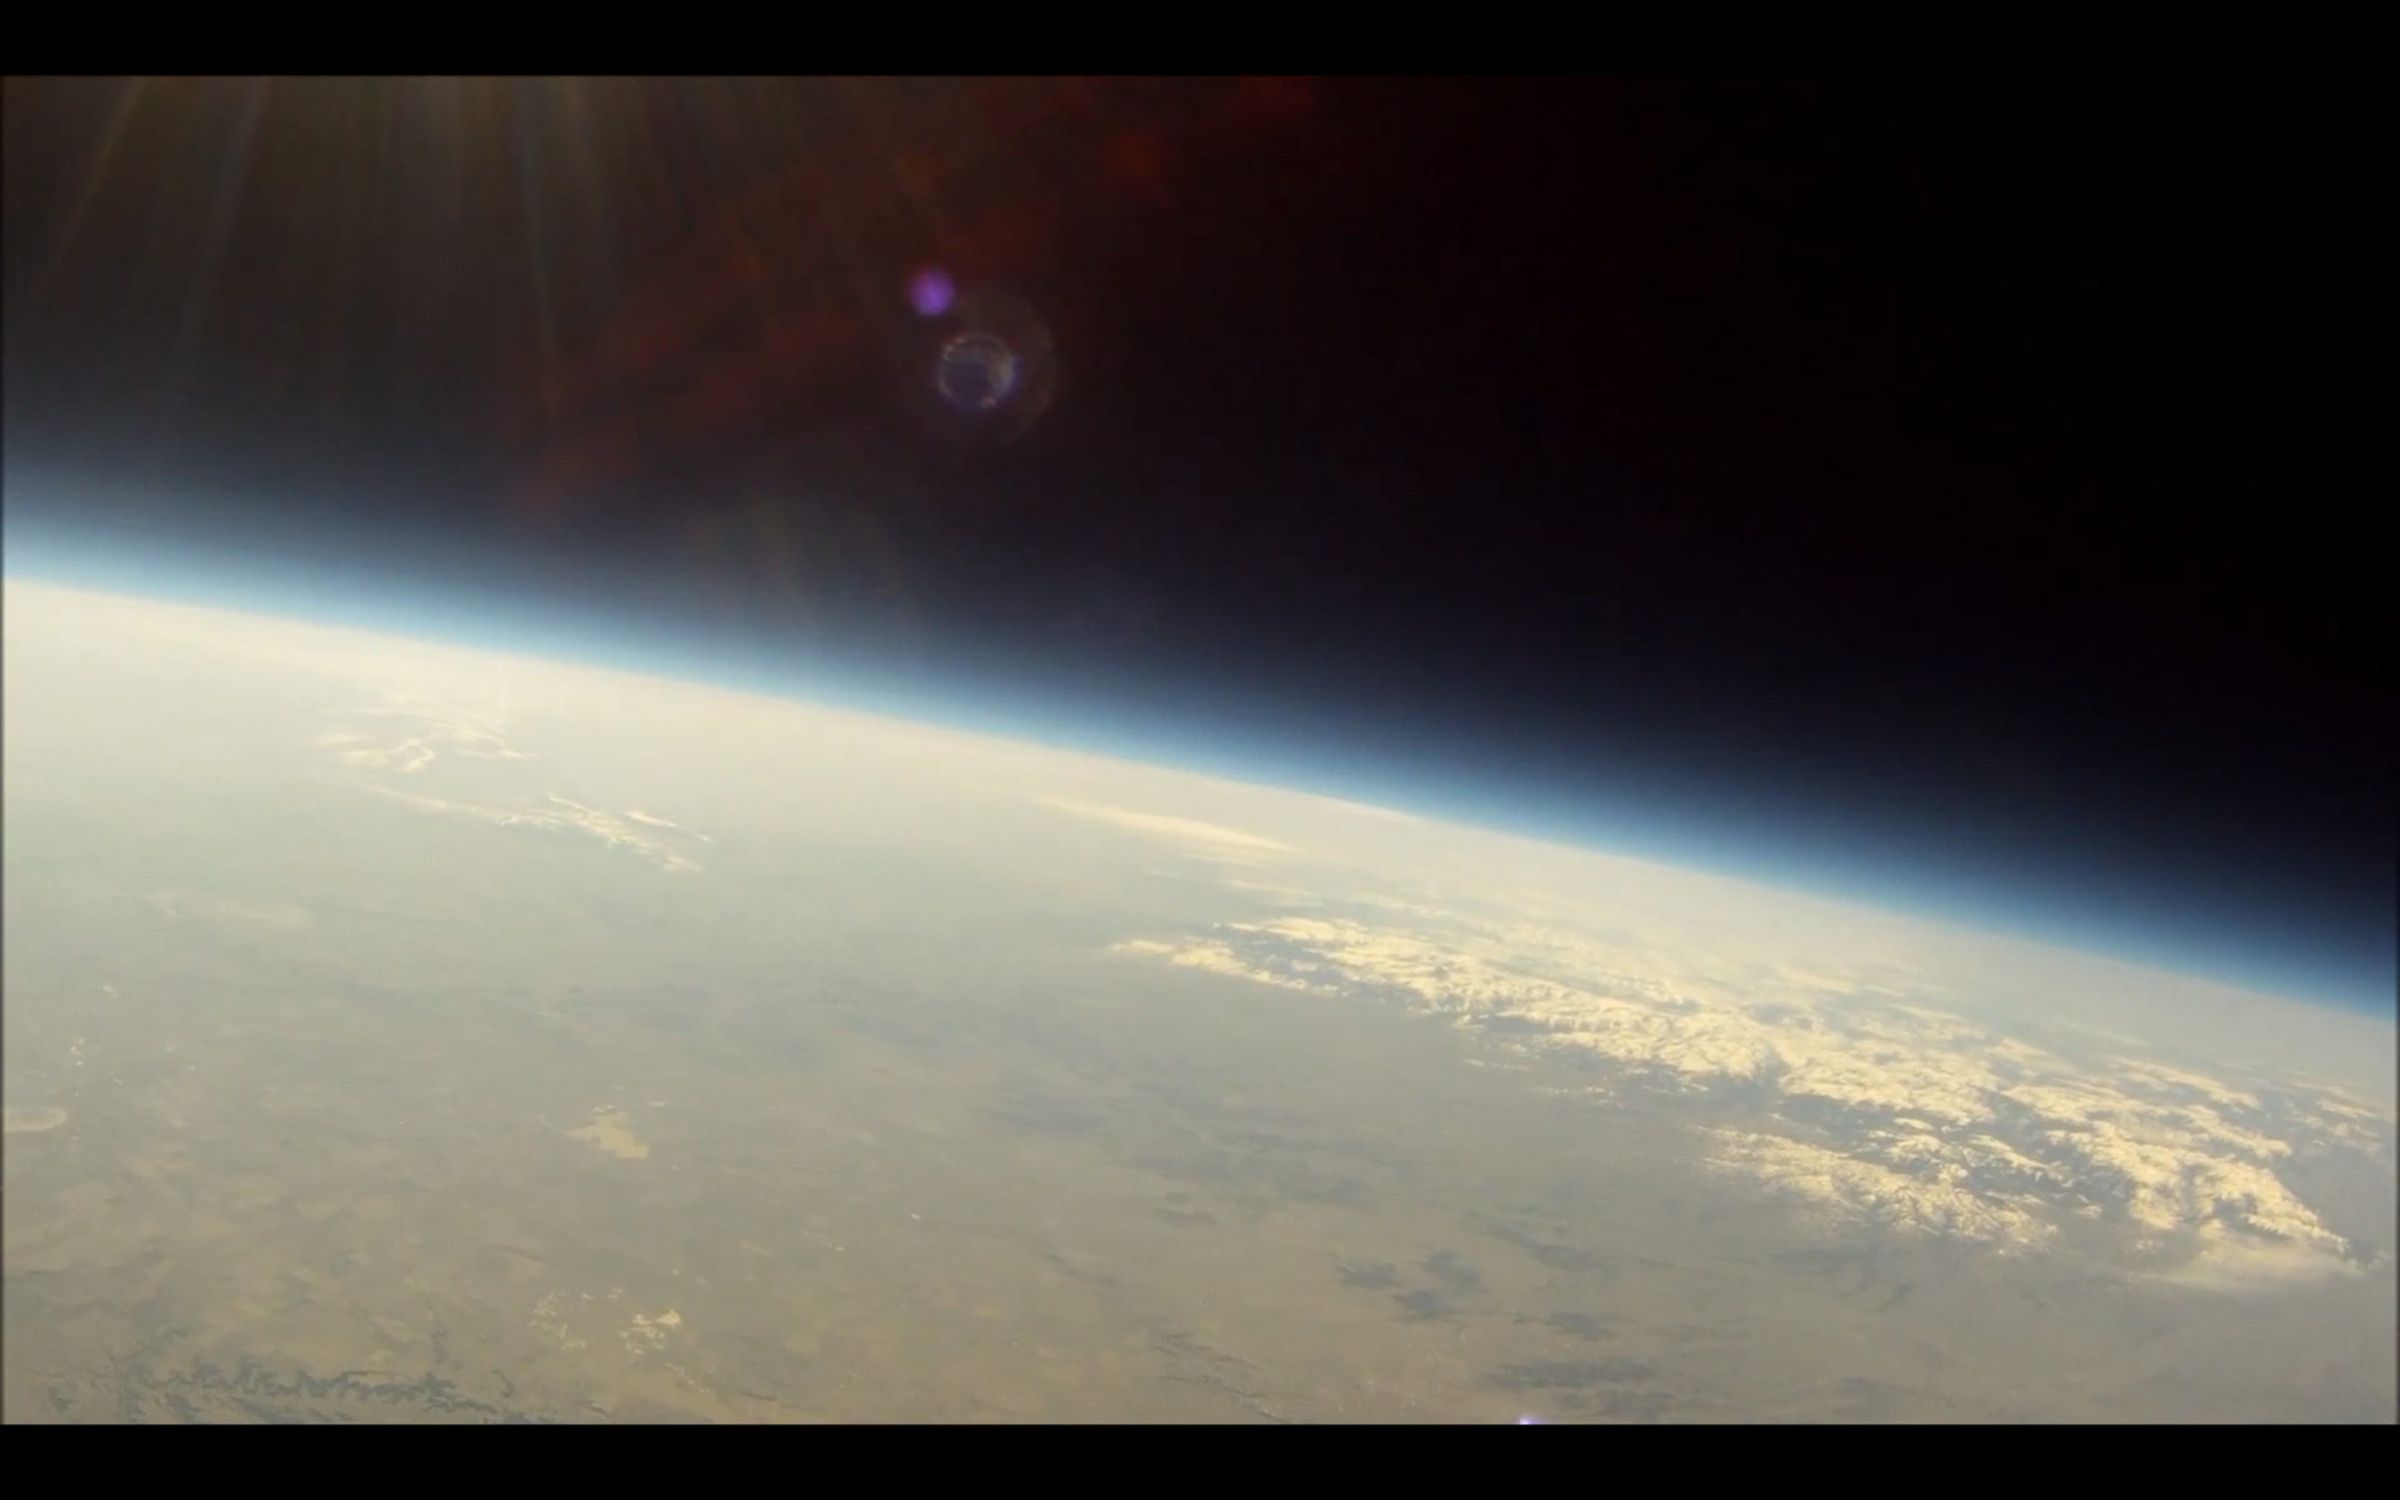 A photo taken from the stratosphere (84,000 feet up) during one of Montana Space Grant Consortium's high-altitude balloon tests in 2014.